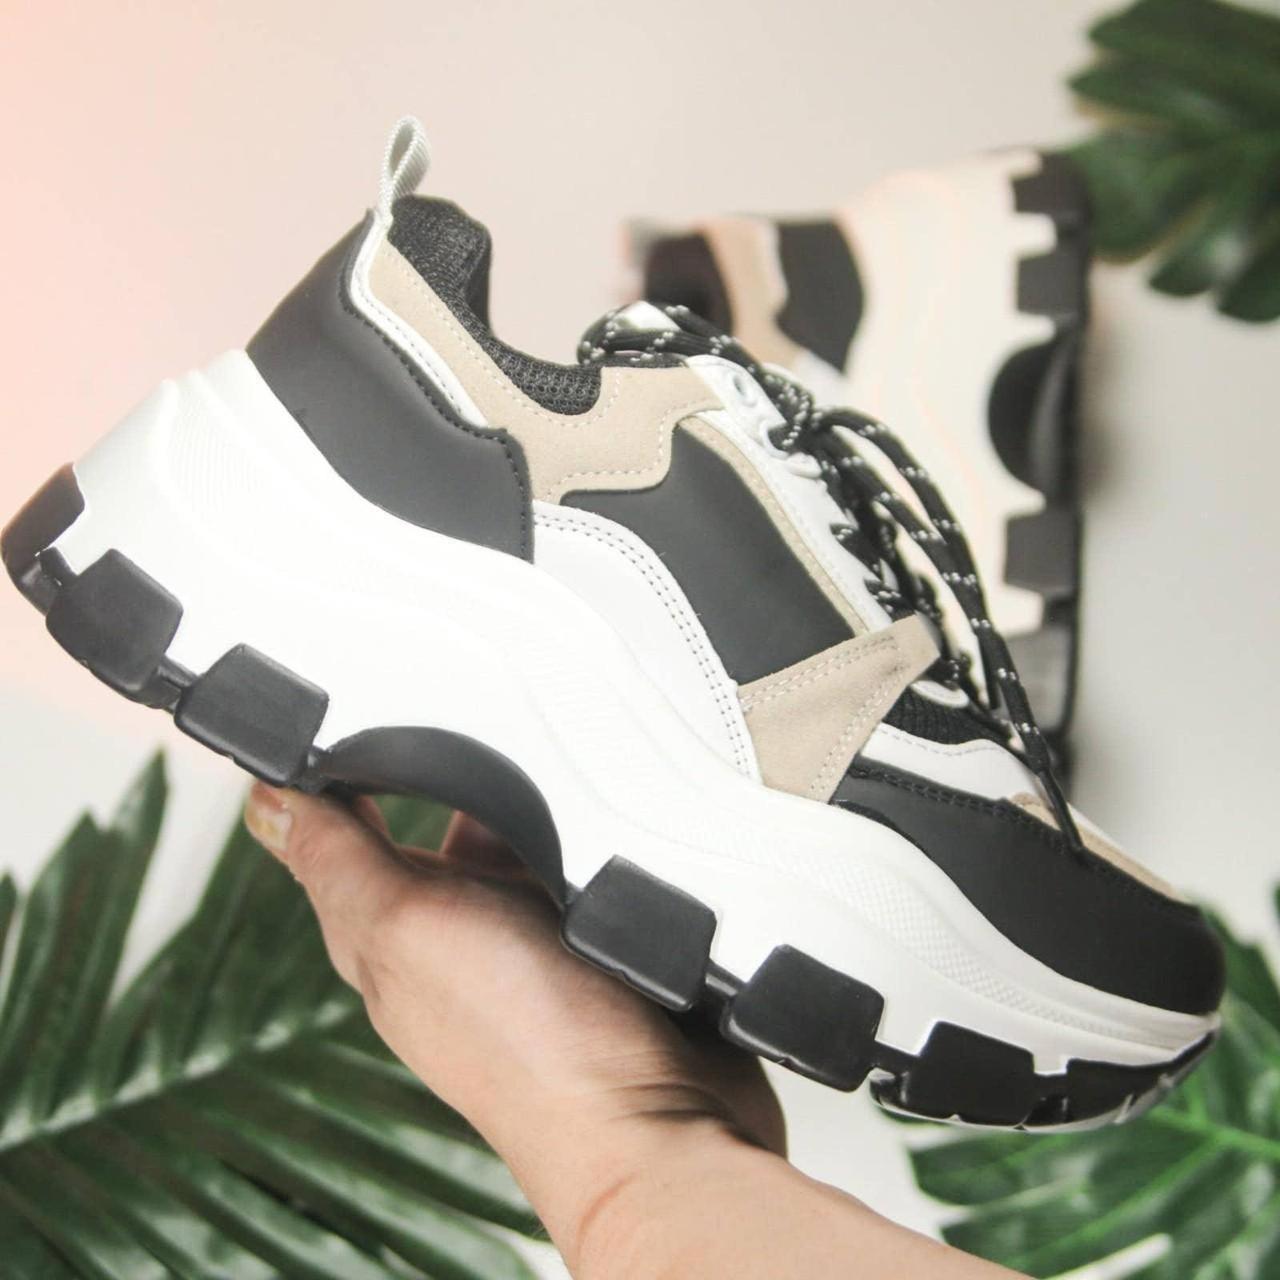 Product Image 1 - Name: Chunky Womens Platform Sneakers